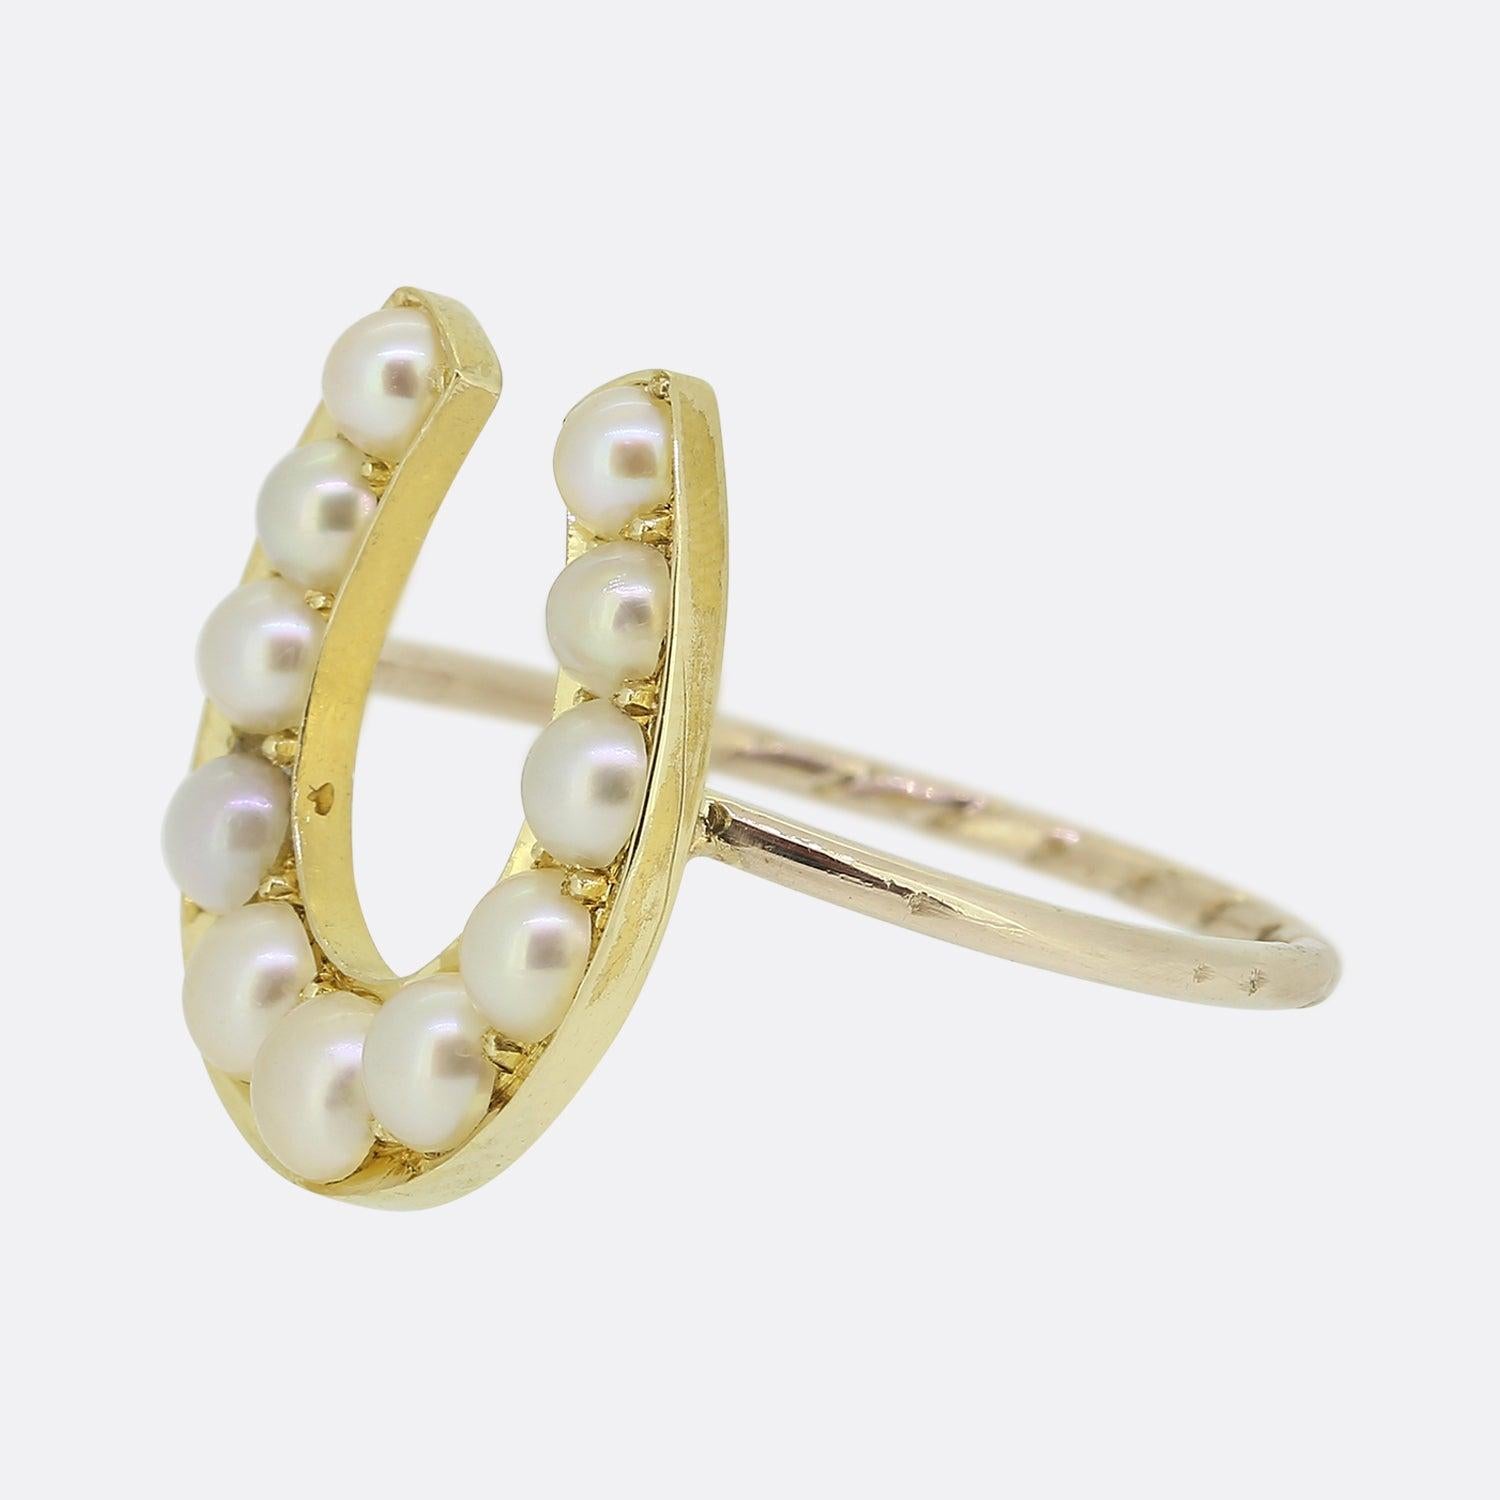 Here we have a fabulous natural pearl ring originally dating back to the Victorian era. The face has been crafted into the shape of a lucky horseshoe, a common symbol associated with jewellery of the time with each being individually claw set and